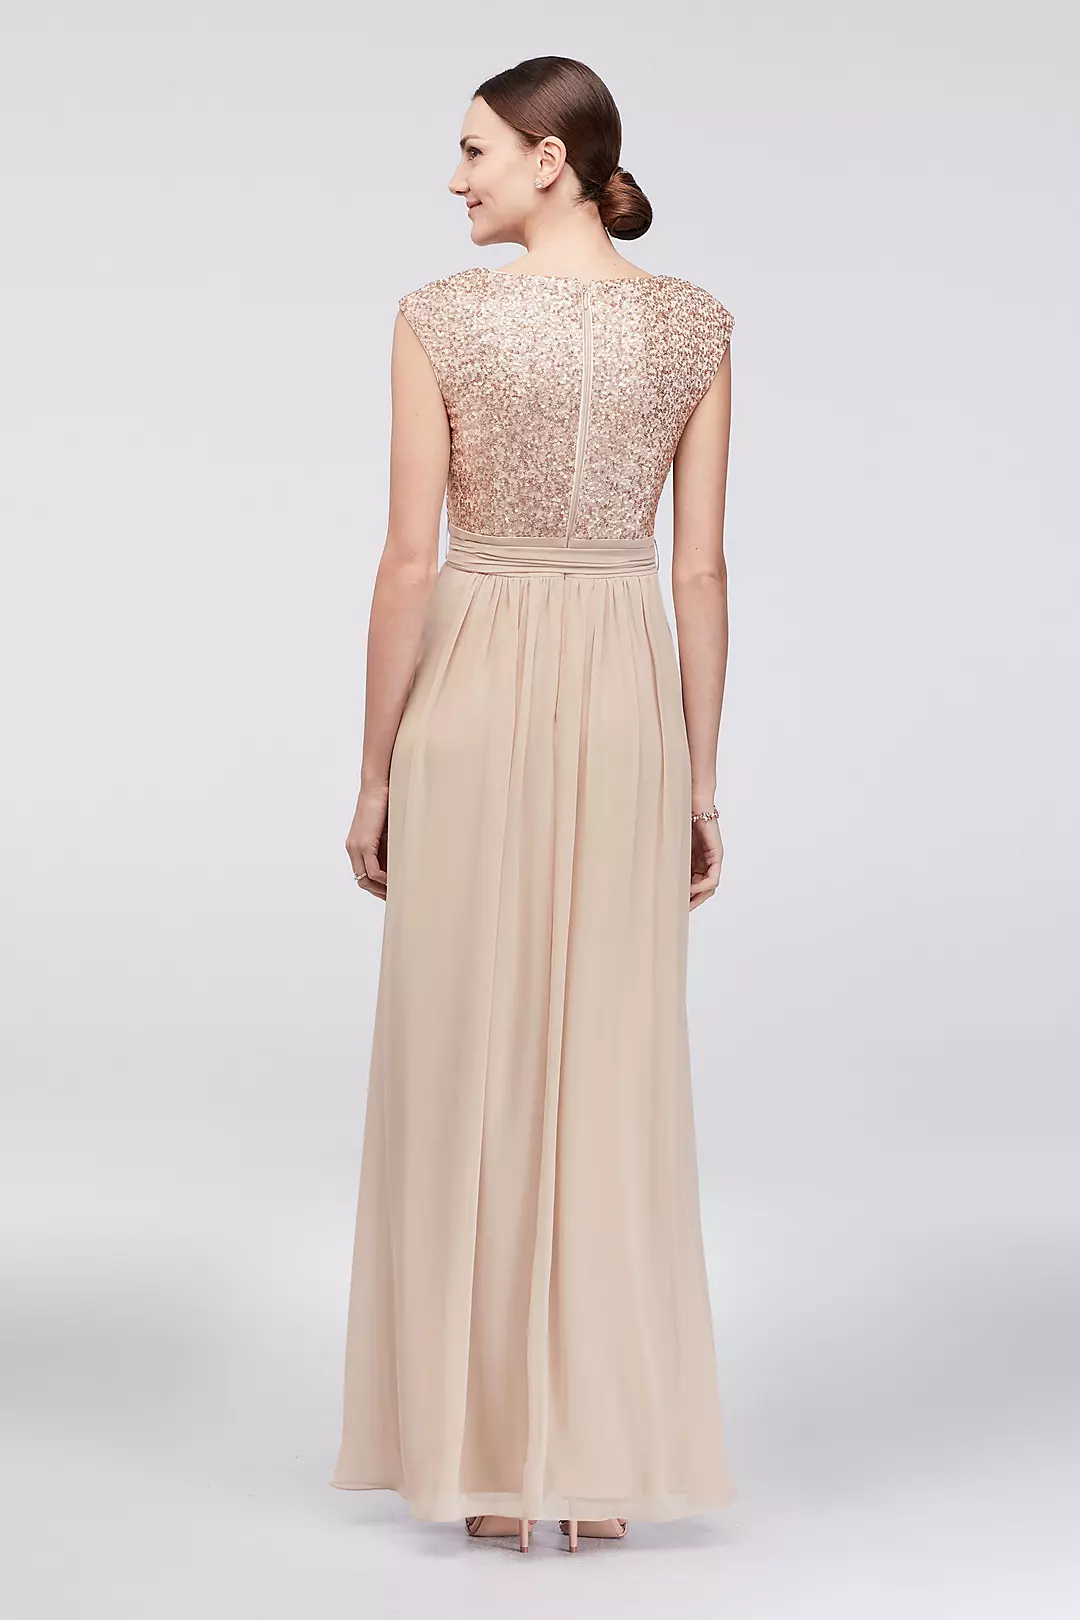 Cap Sleeve Sequin and Chiffon A-Line Gown Image 2